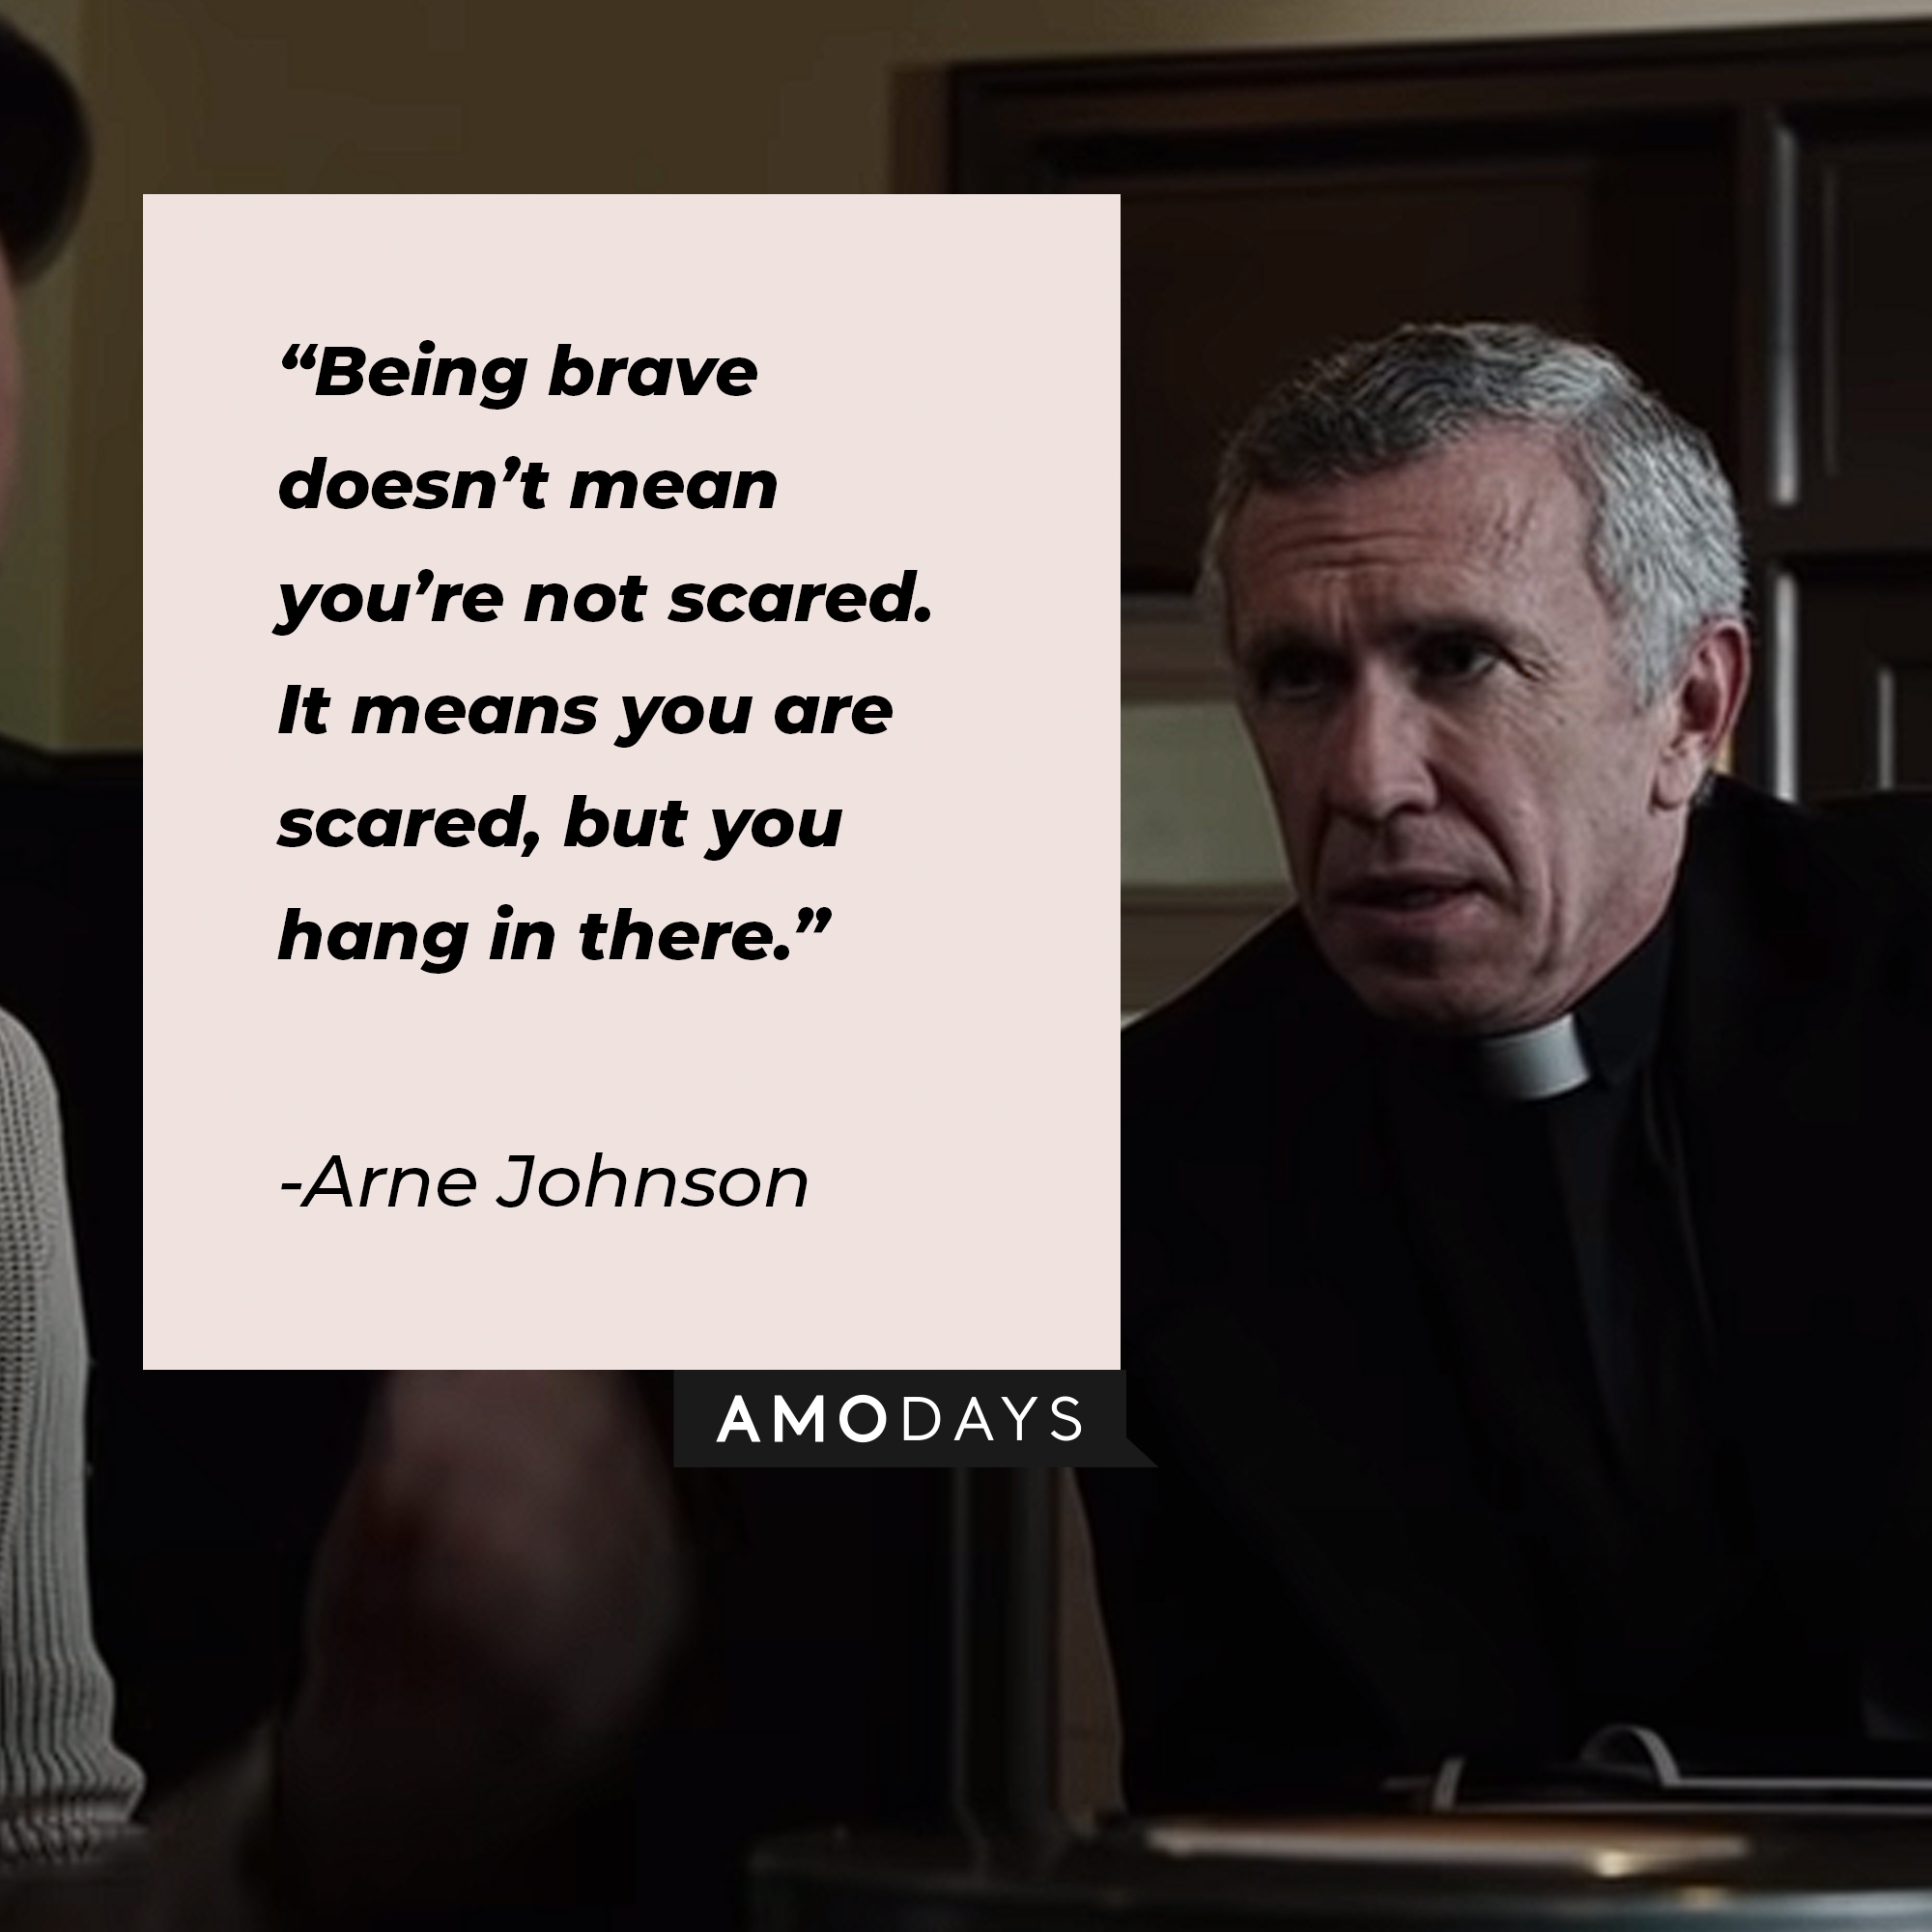 An image of a character from the Conjuring franchise with Arne’s quote: “Being brave doesn’t mean you’re not scared. It means you are scared, but you hang in there.” | Source: youtube.com/WarnerBrosPictu